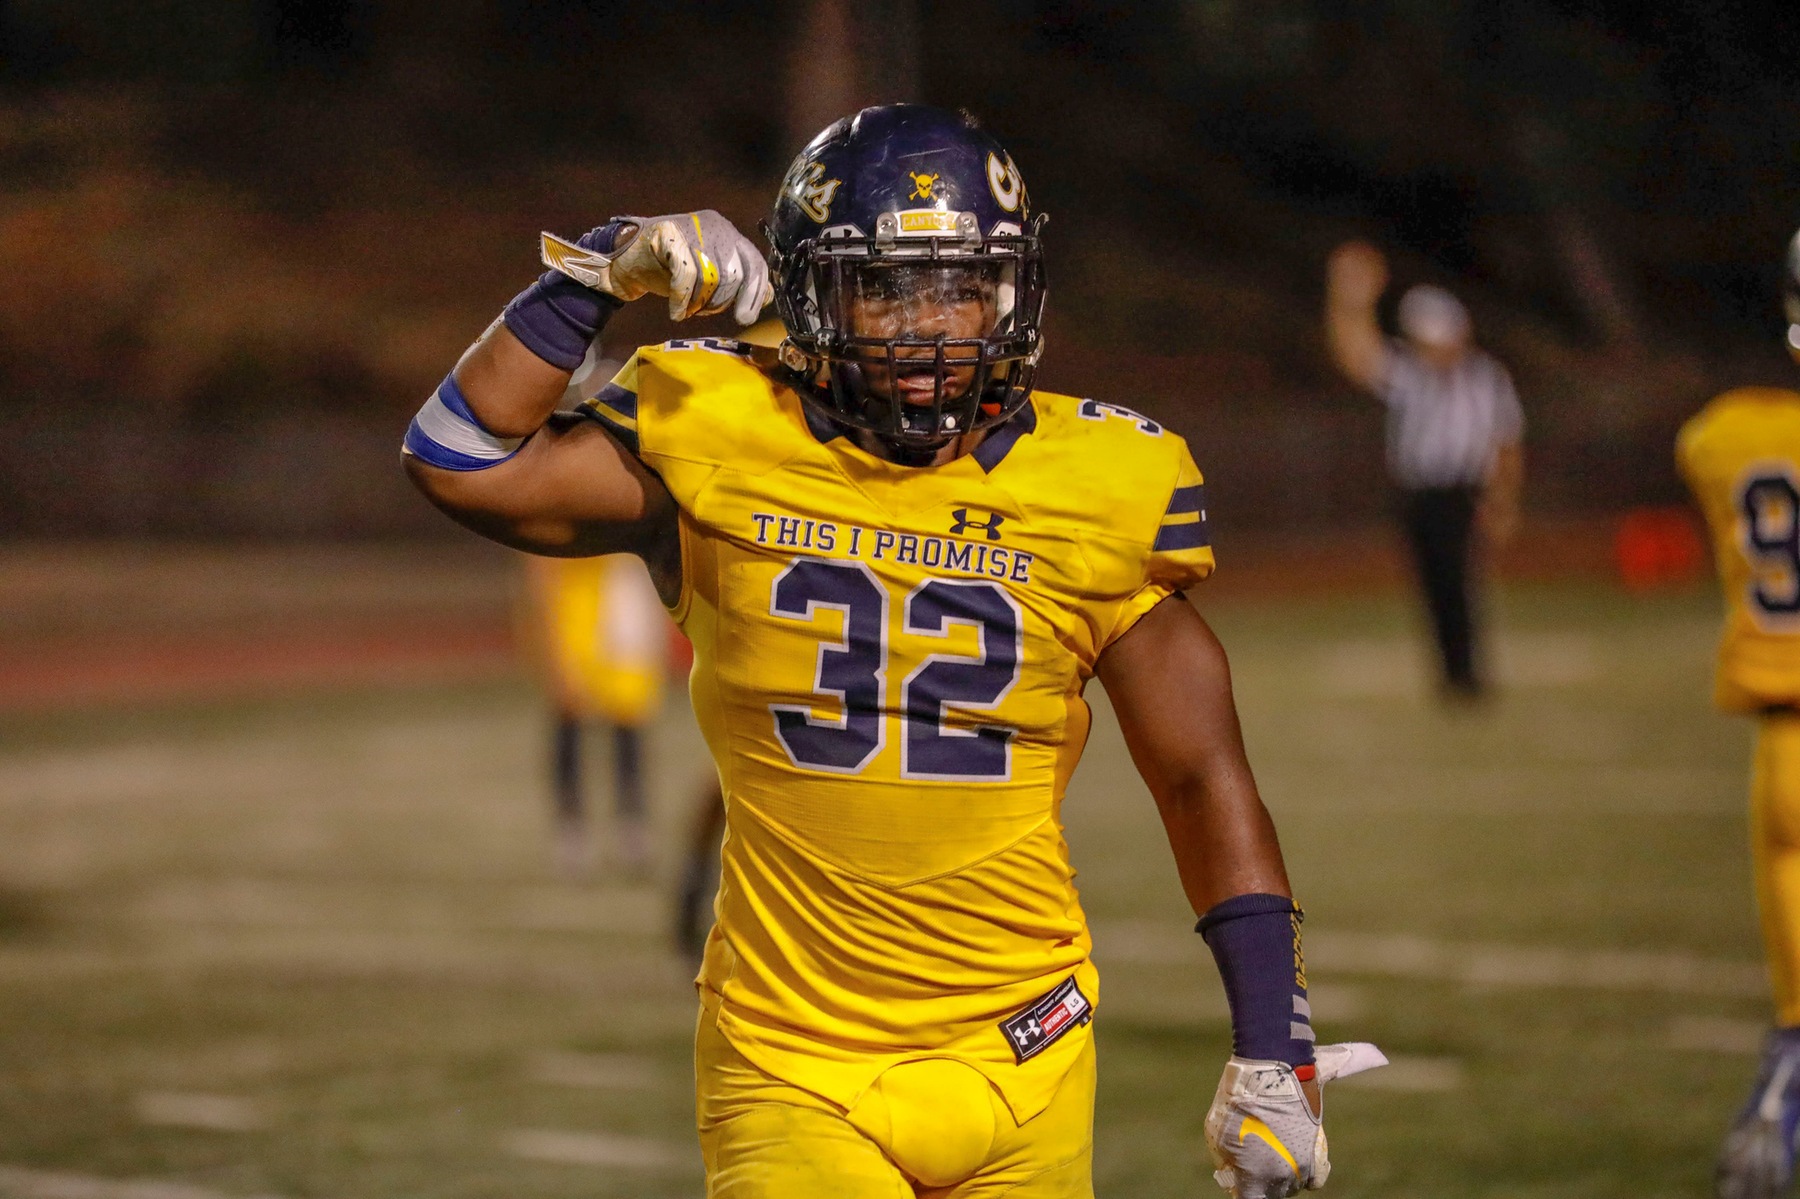 College of the Canyons freshman linebacker Tariq Speights finished the 2018 season with a team-best 76 total tackles, four sacks, eight tackles for loss, two forced fumbles, two fumble recoveries and an interception through 11 contests. — Jacob Velarde/COC Sports Information